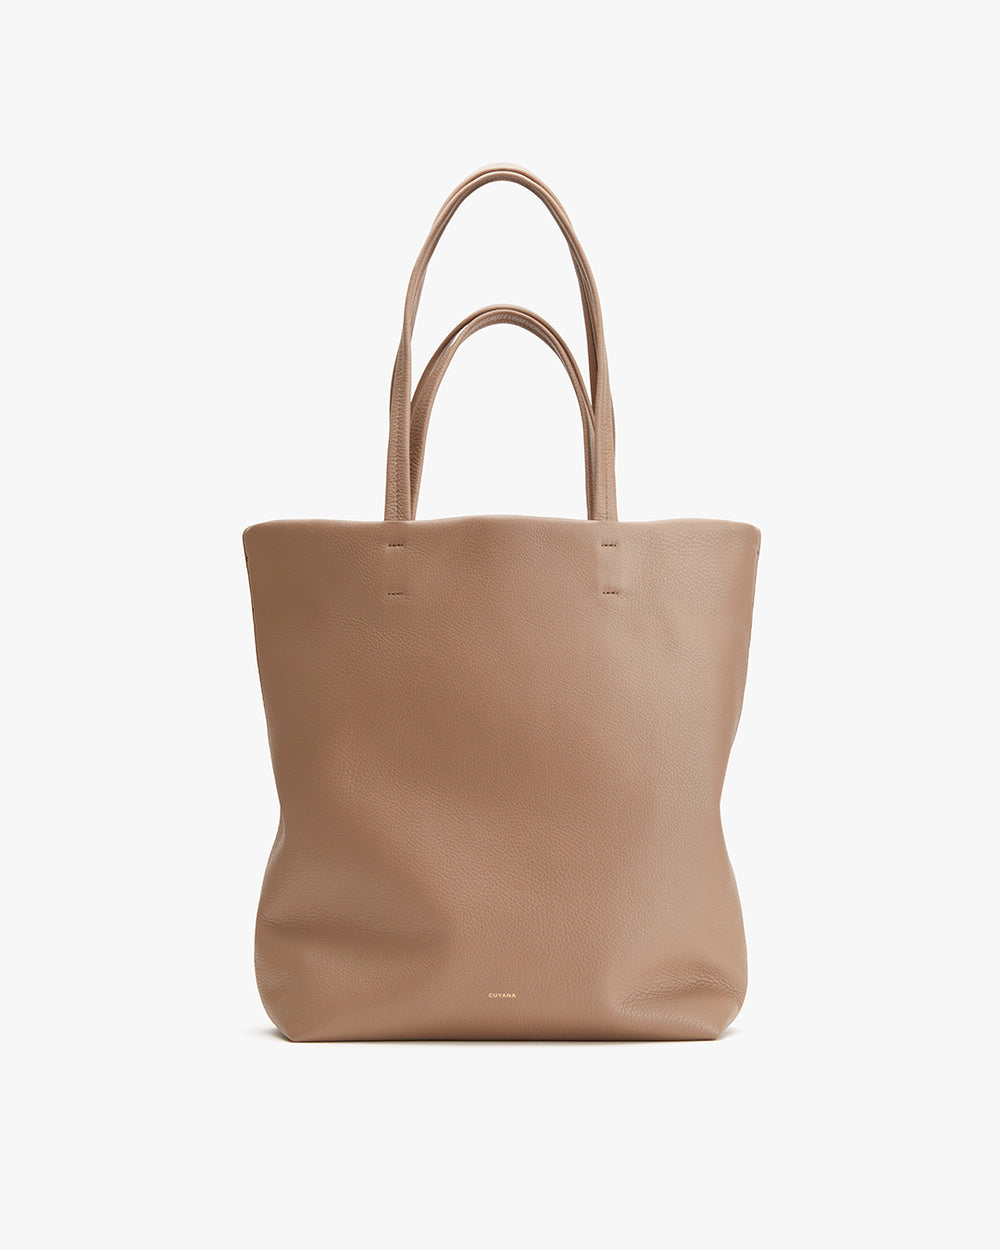 Leather tote bag standing upright with two handles.